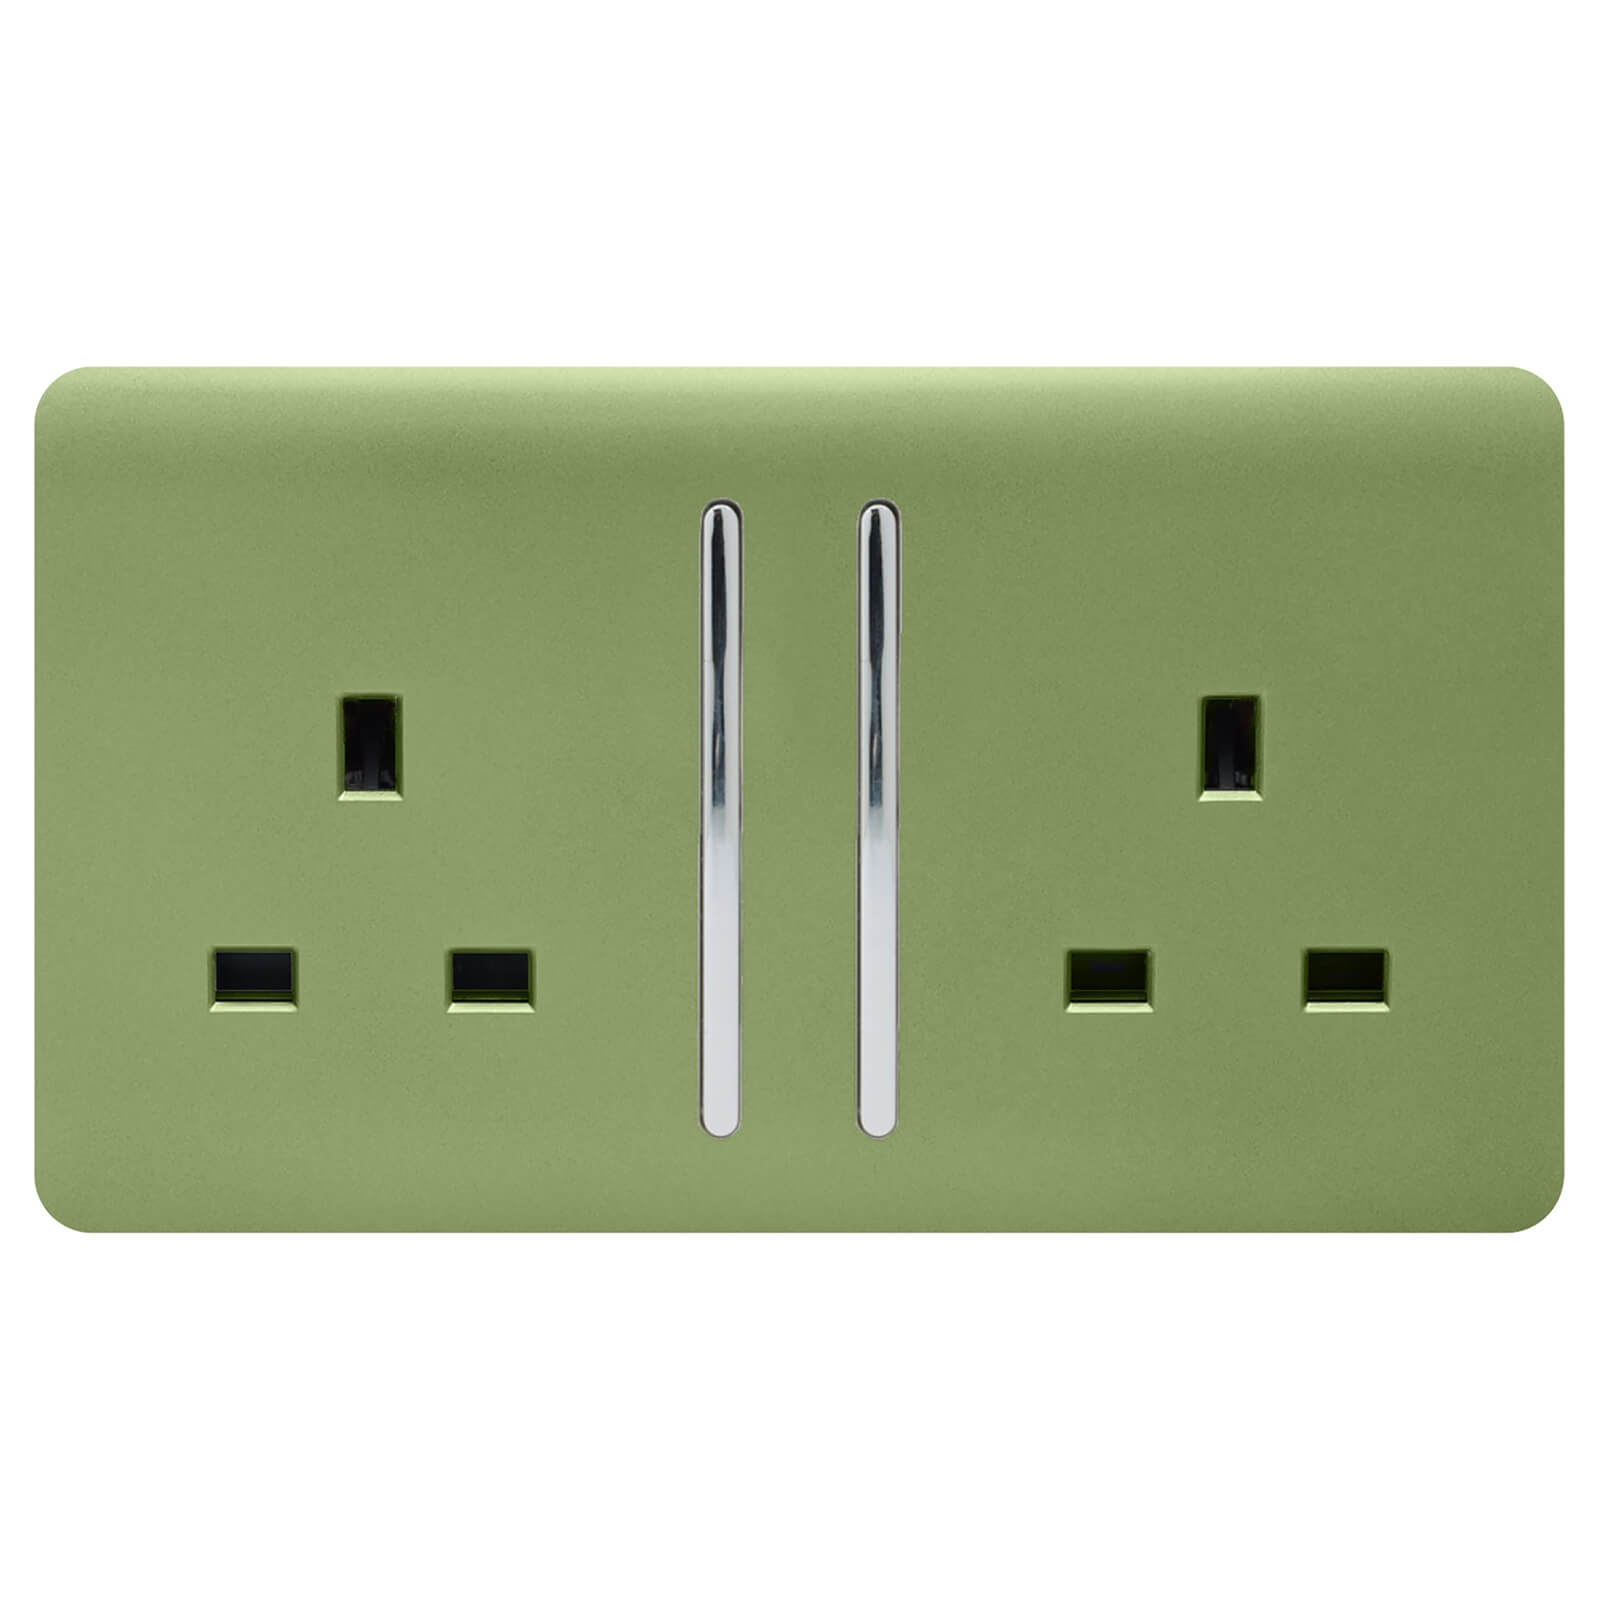 Trendi Switch 2 Gang 13Amp Long Switched Socket in Moss Green